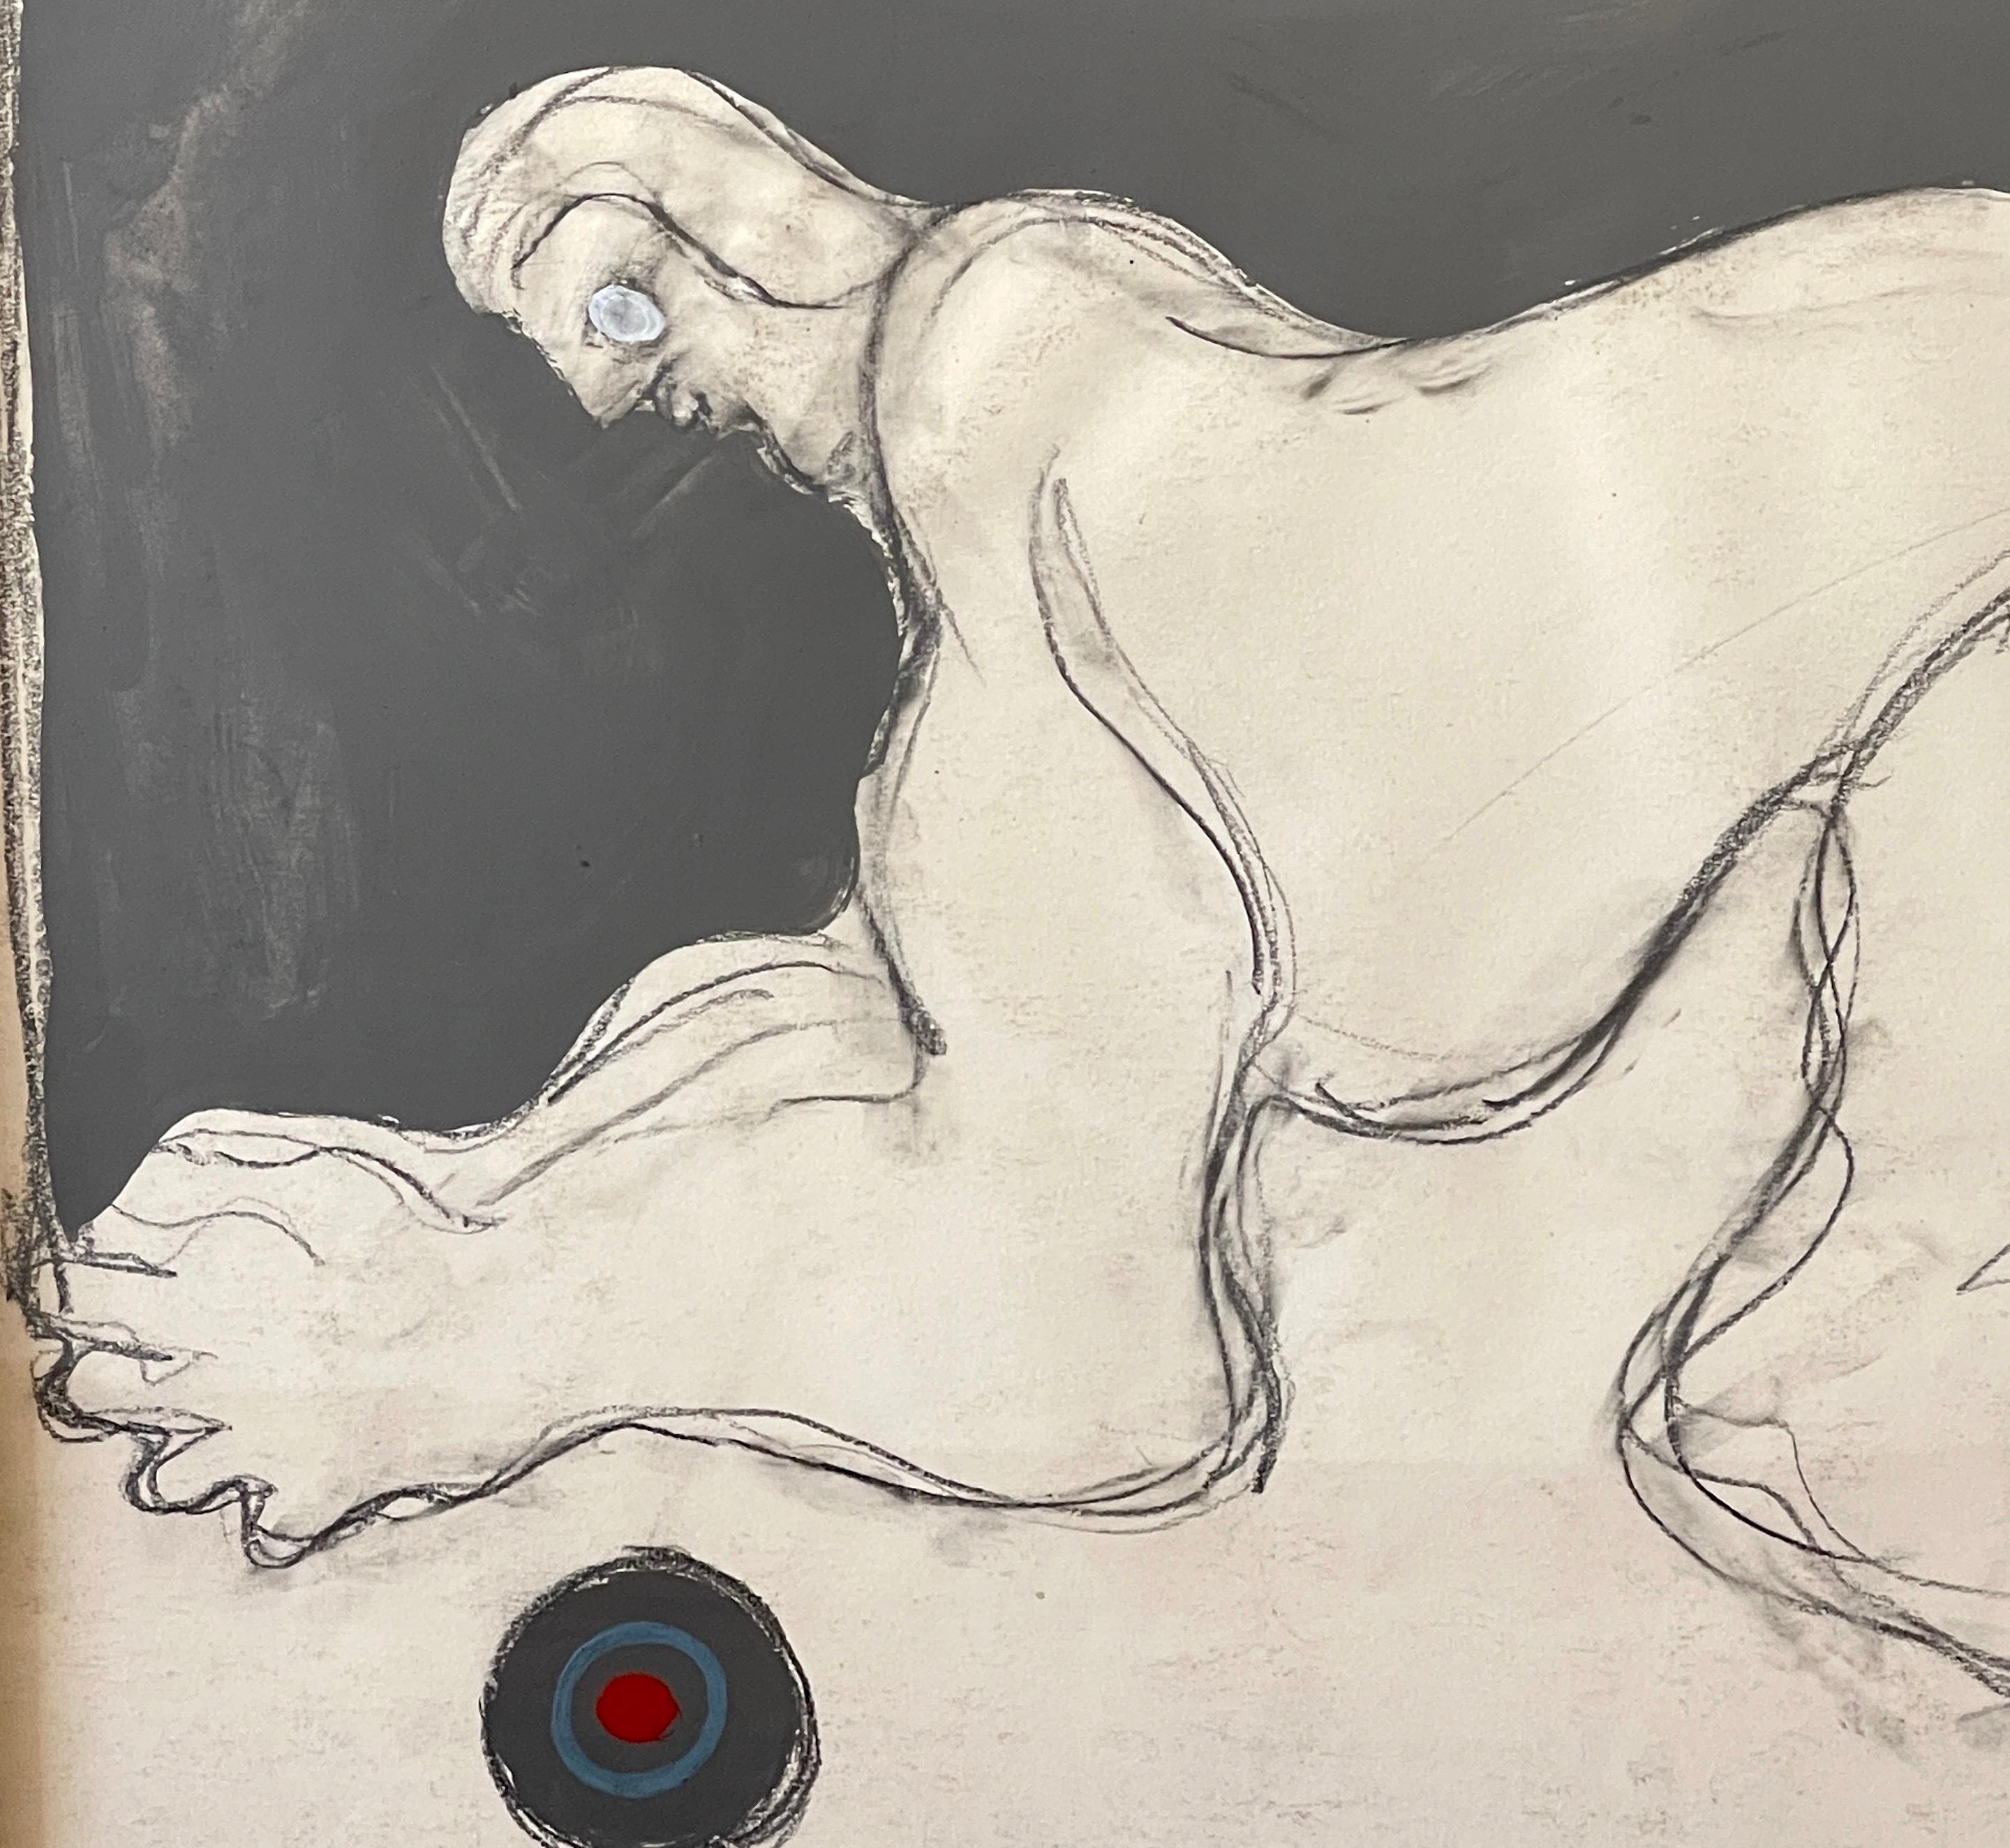 Modern 'Crouching Figure' Oil/Mixed Media on Paper, 1960s by Douglas D. Peden  For Sale